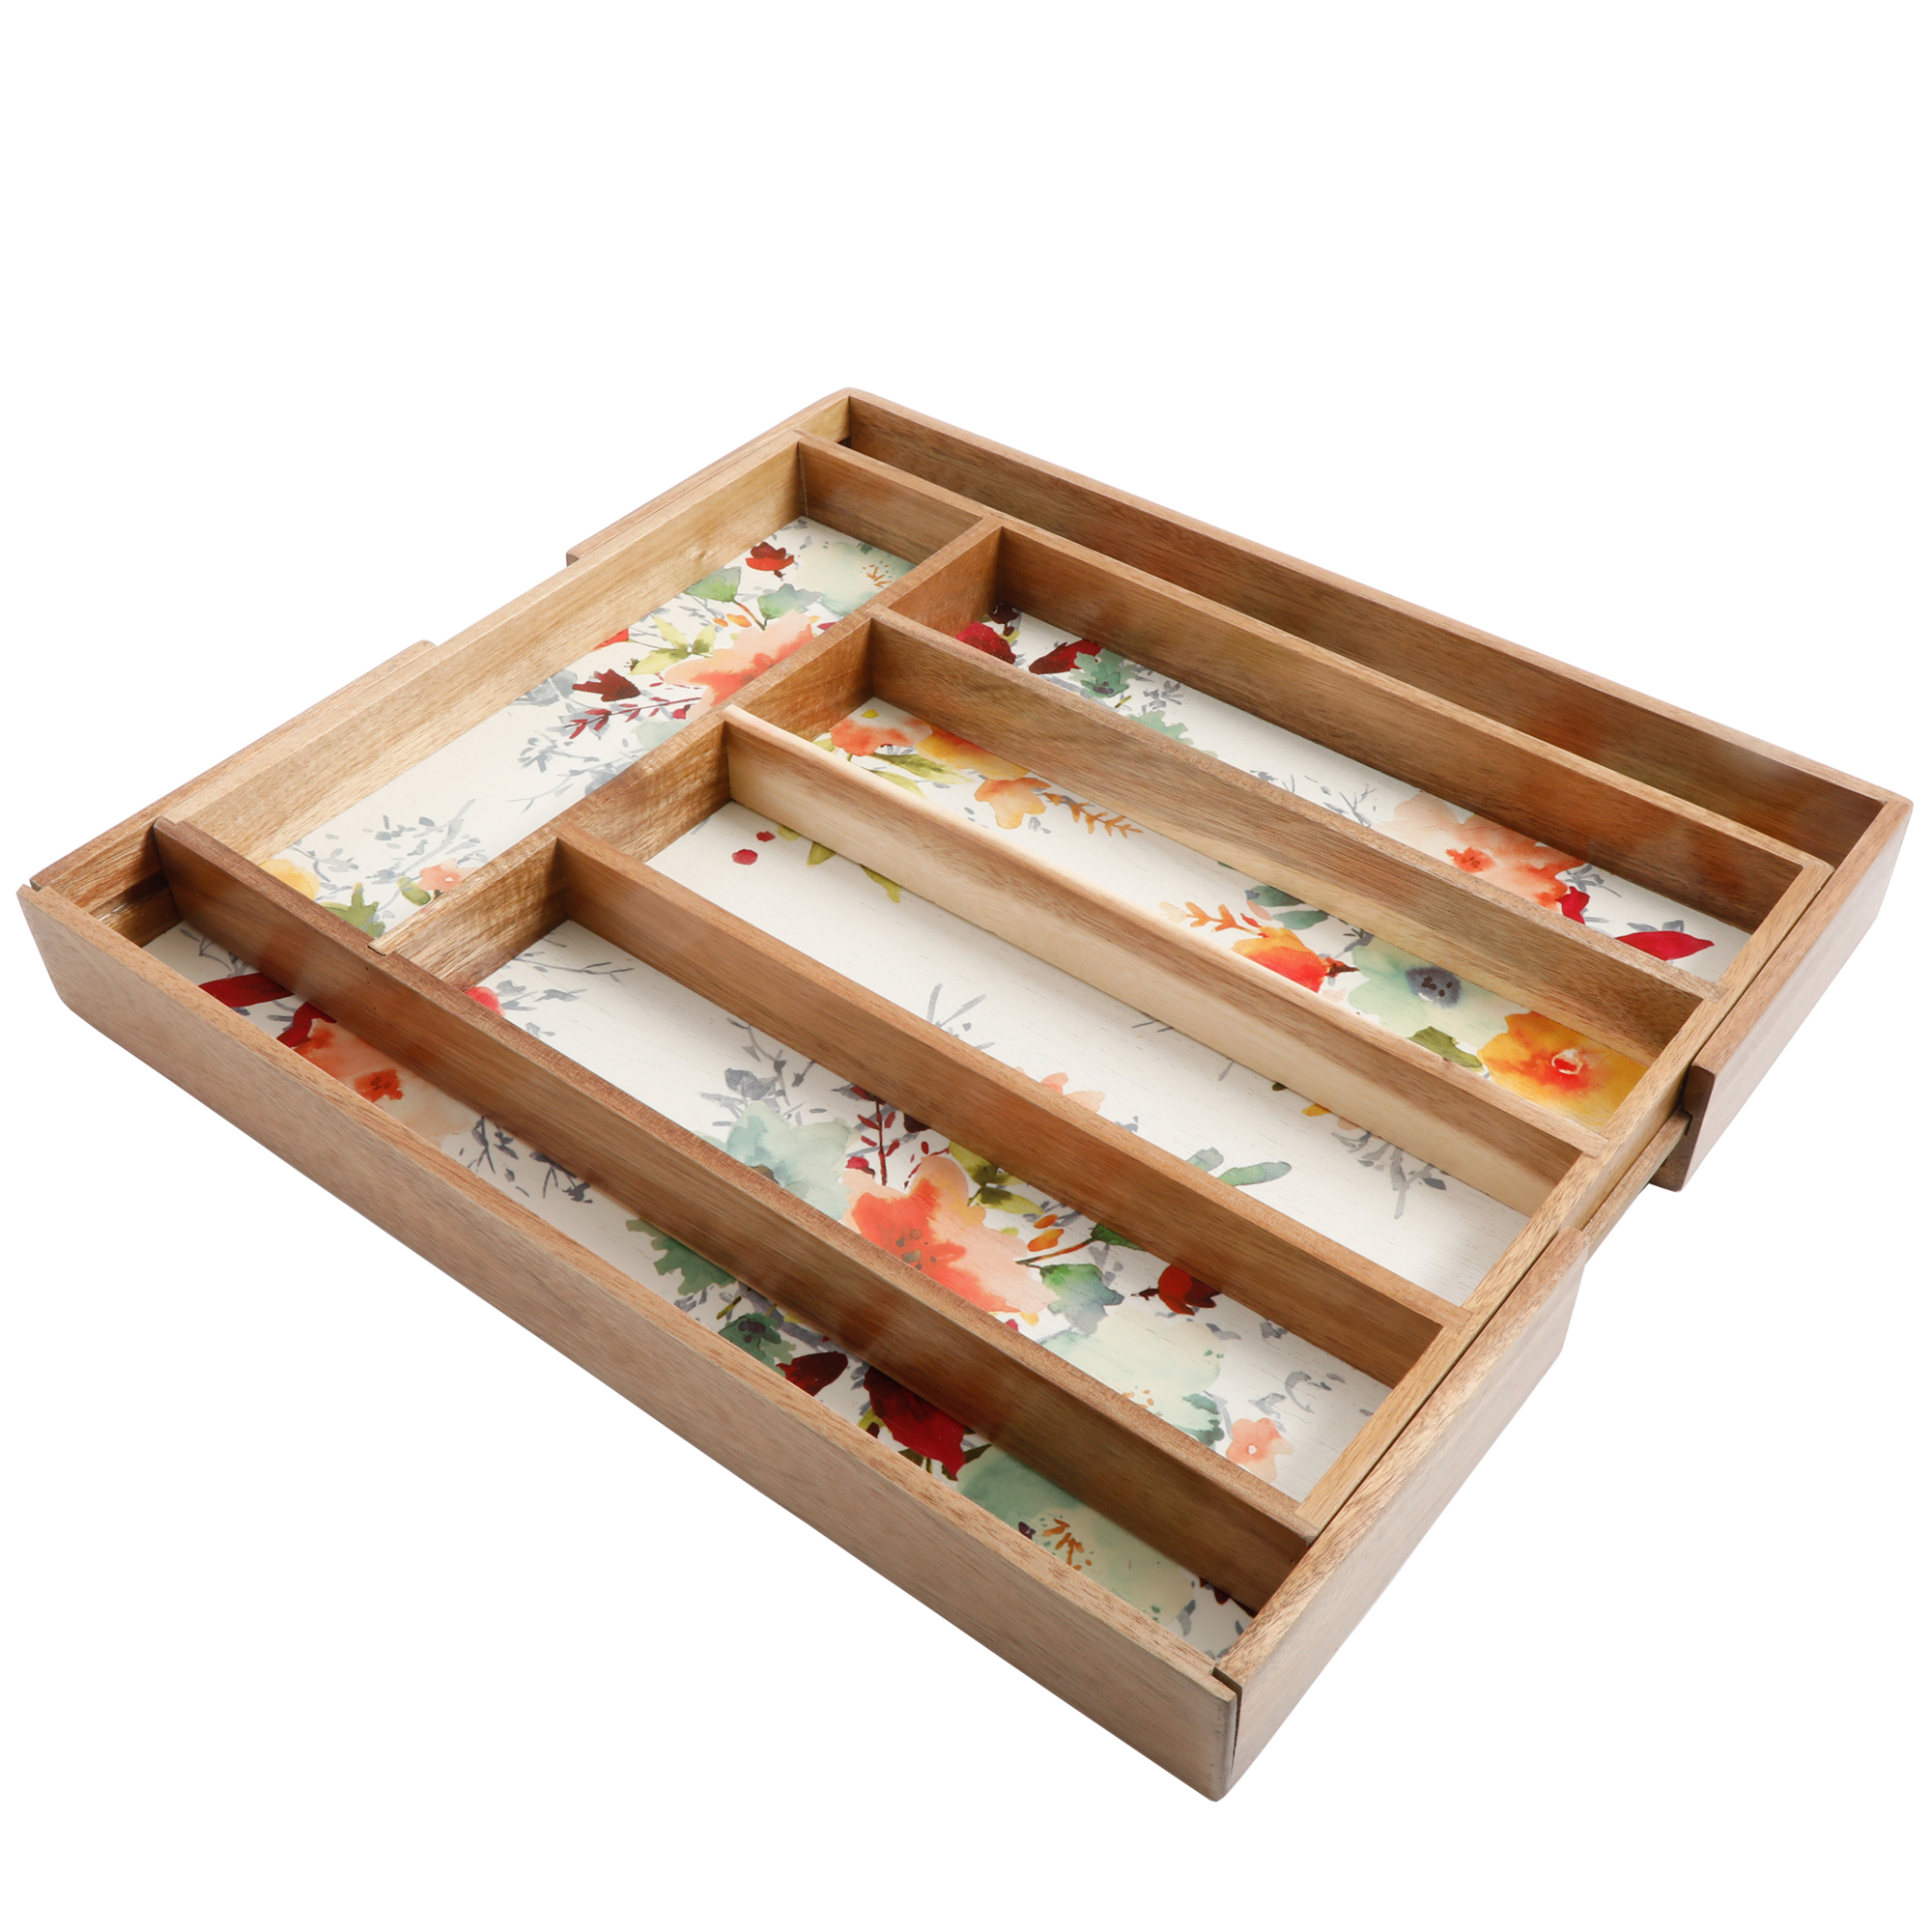 The Pioneer Woman Willow Acacia Wood Expandable Silverware Organizer, 18 x 13 Inch - image 3 of 8